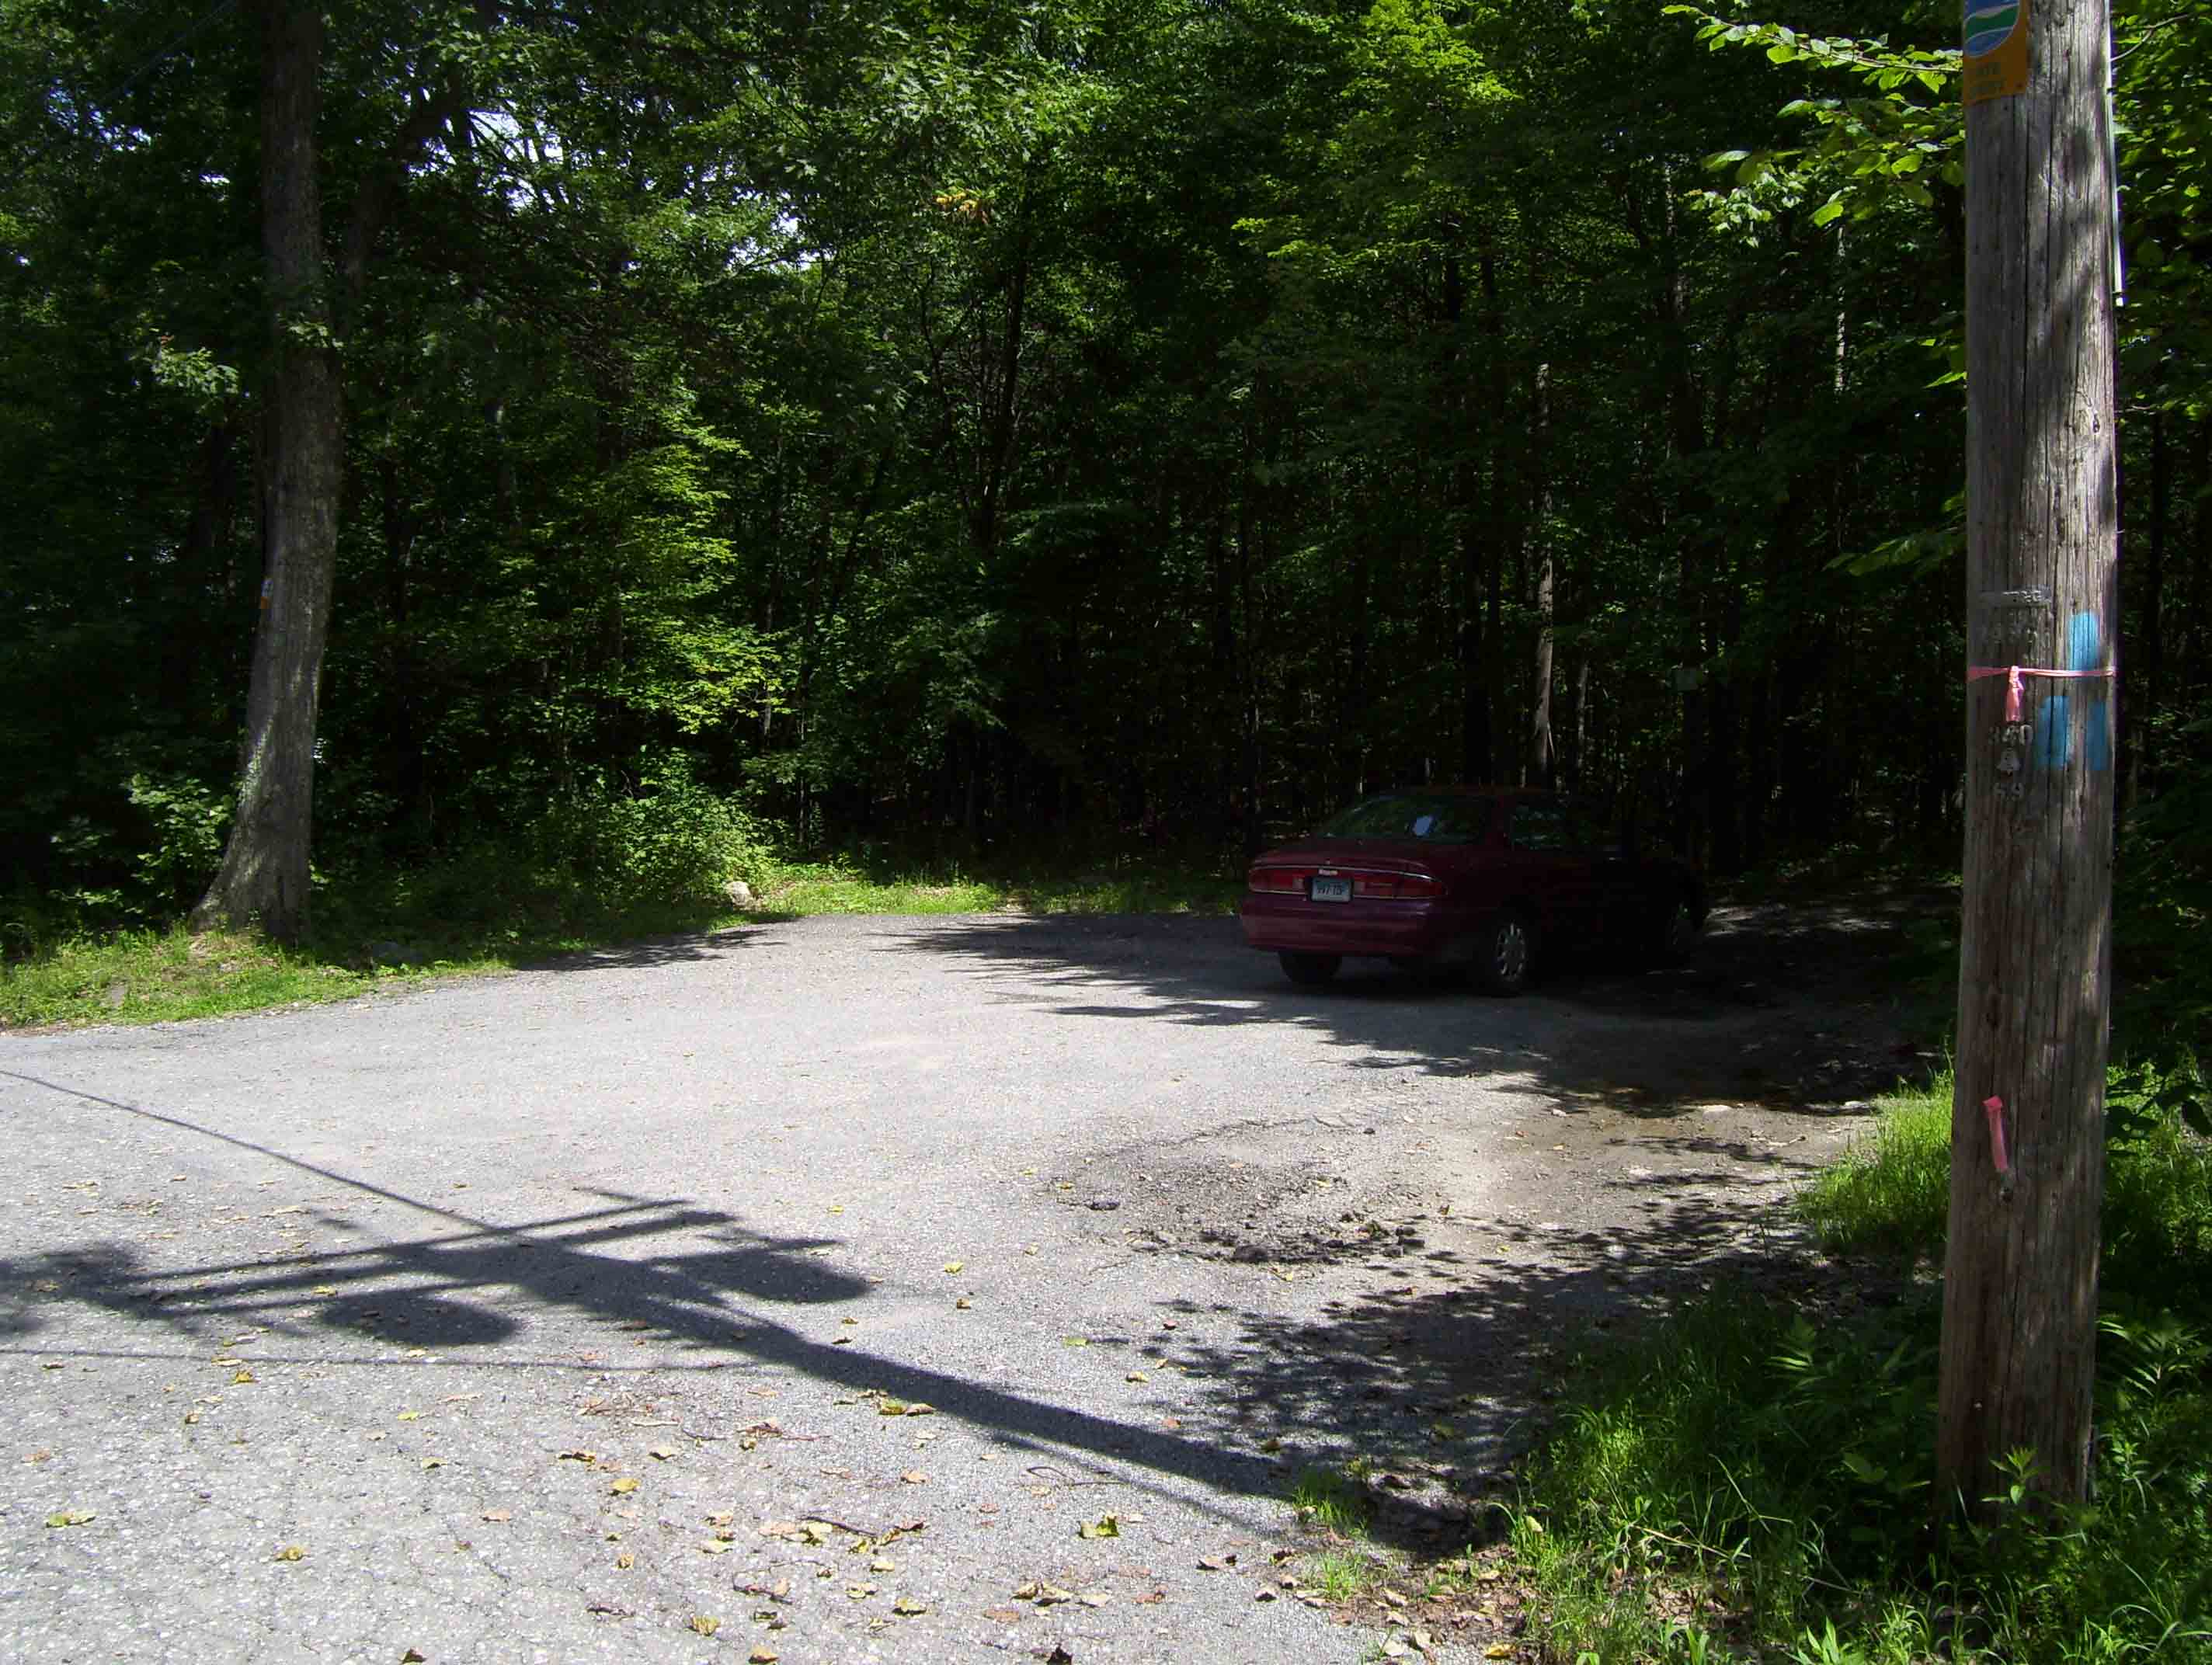 mm 2.2 Parking on Depot Hill Road. This is across from some sort of communication tower complex.  Follow the road 0.1 miles to the trail crossing.  The road is blue-blazed.  Courtesy dlcul@conncoll.edu